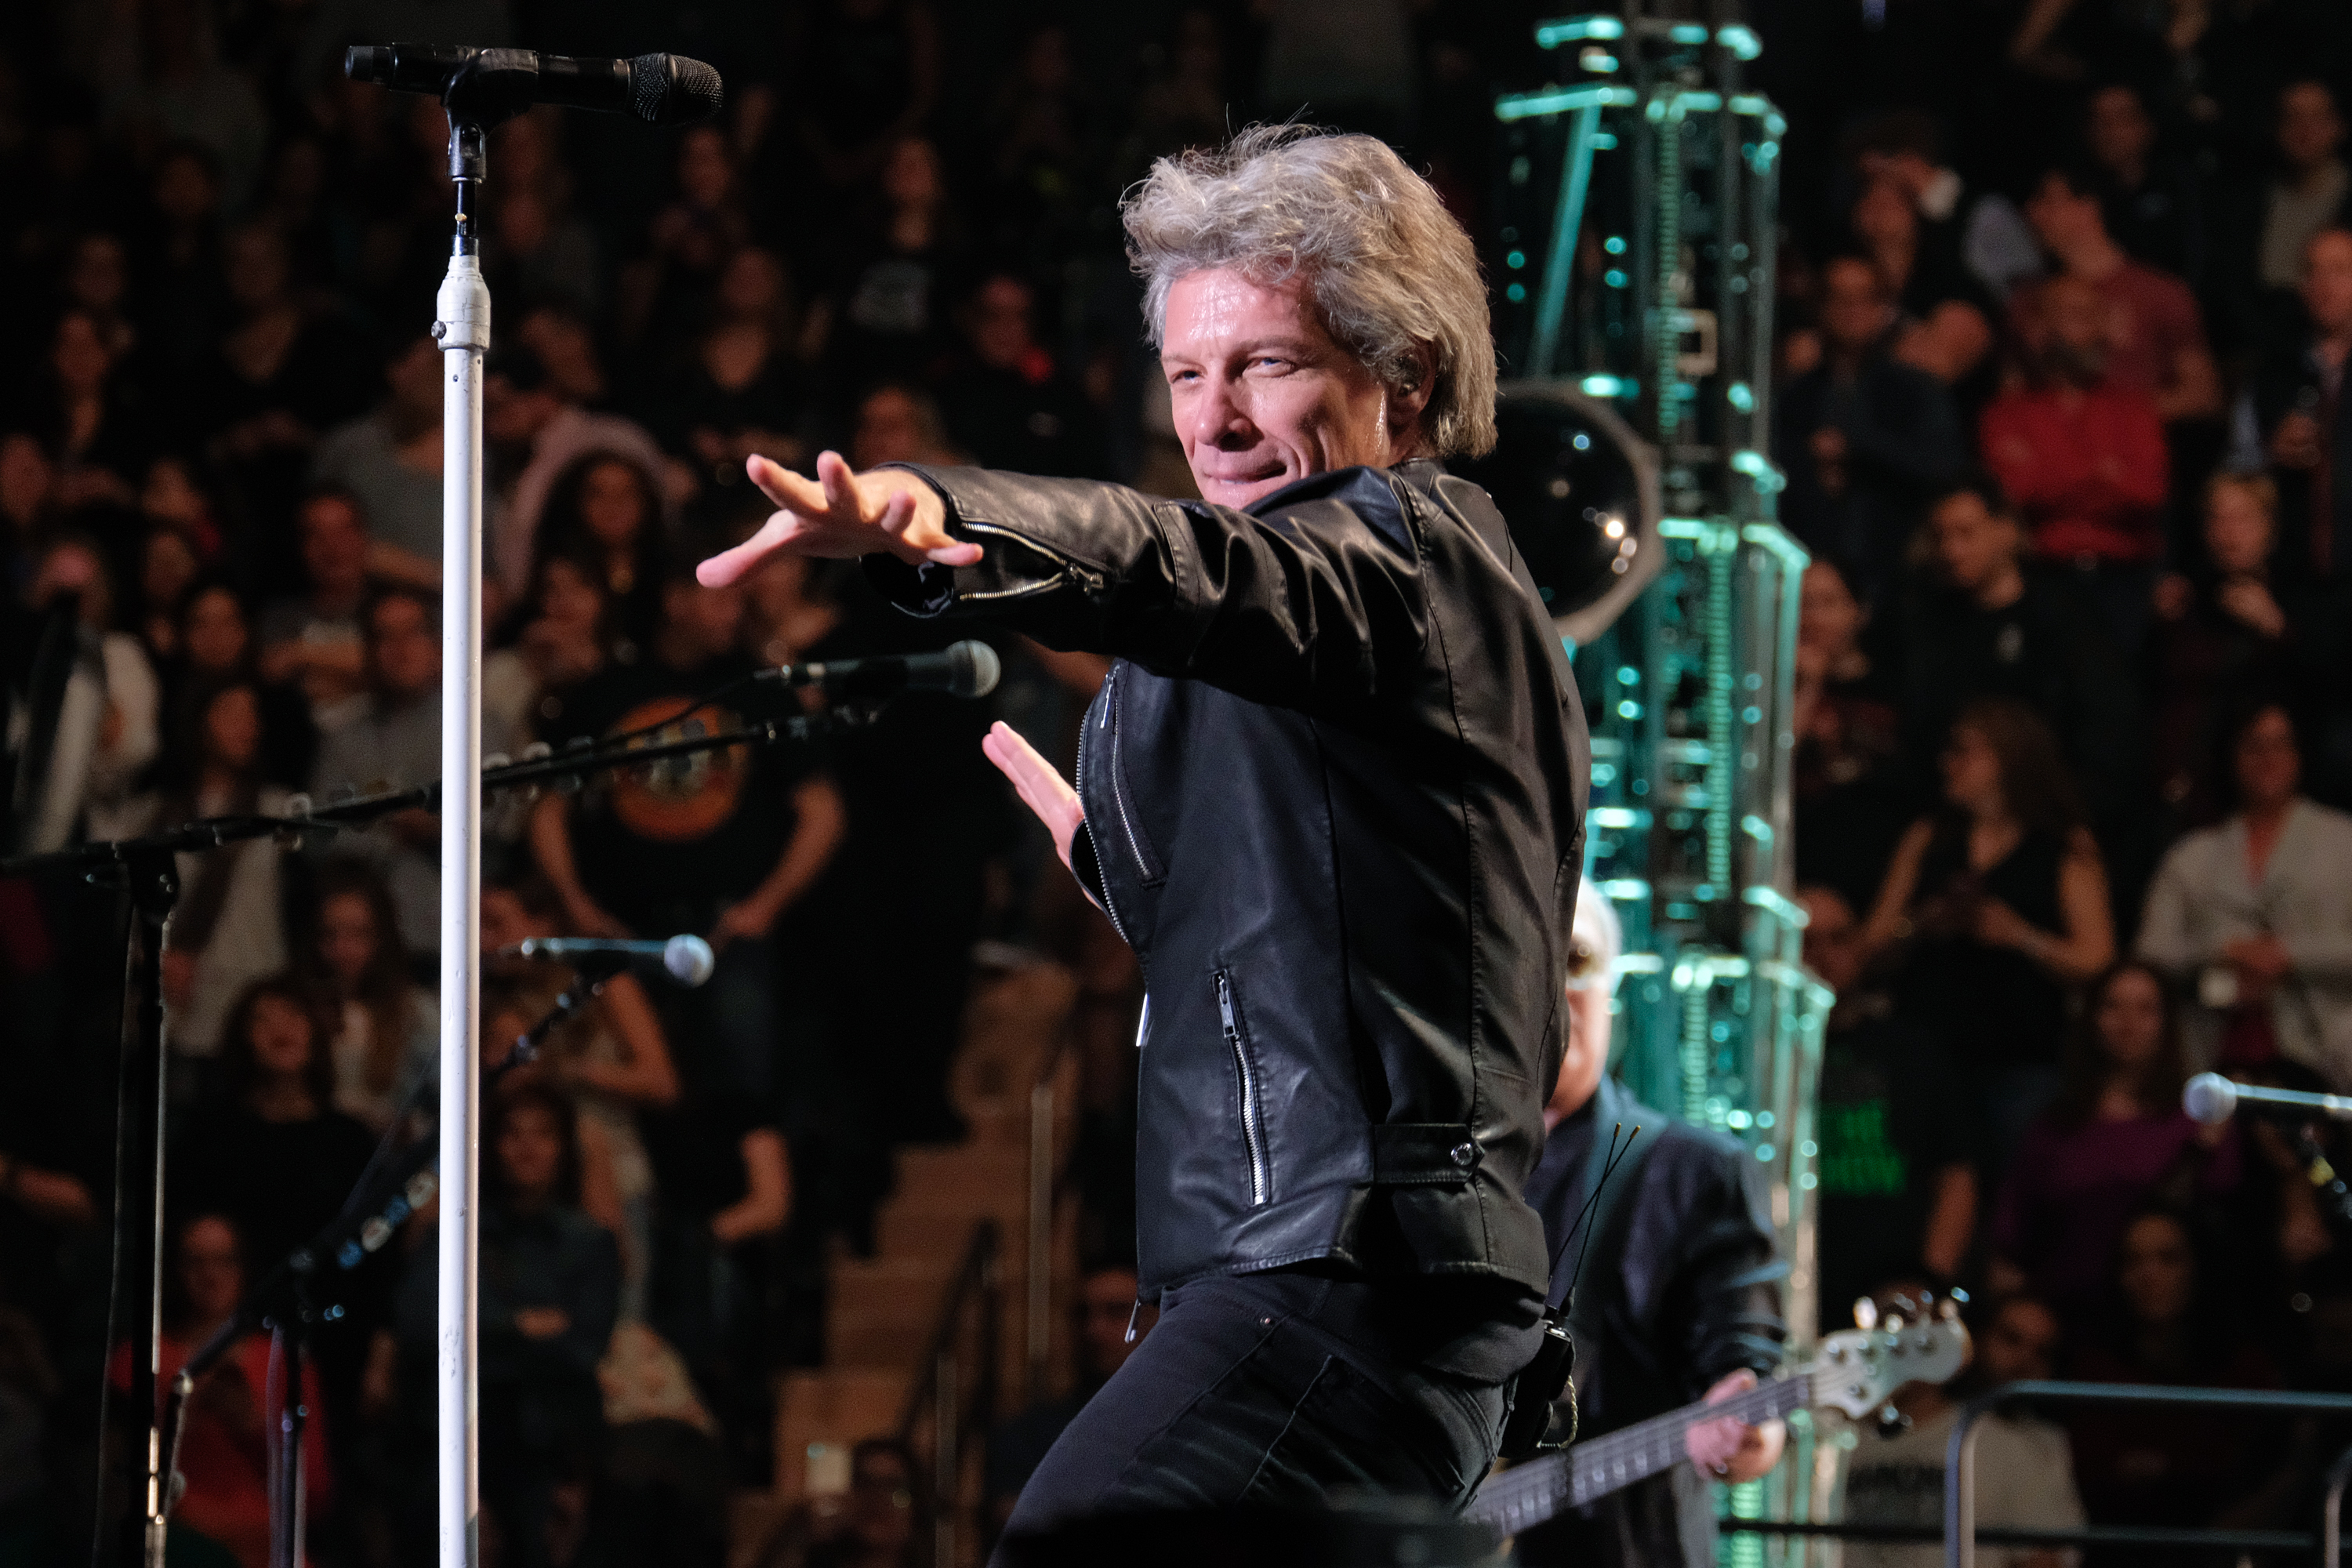 NEW YORK, NY - APRIL 13: Musician Jon Bon Jovi of the band Bon Jovi performs live on stage for the 'This House Is Not For Sale' Tour 2017 at Madison Square Garden on April 13, 2017 in New York City. (Photo by Matthew Eisman/Getty Images)